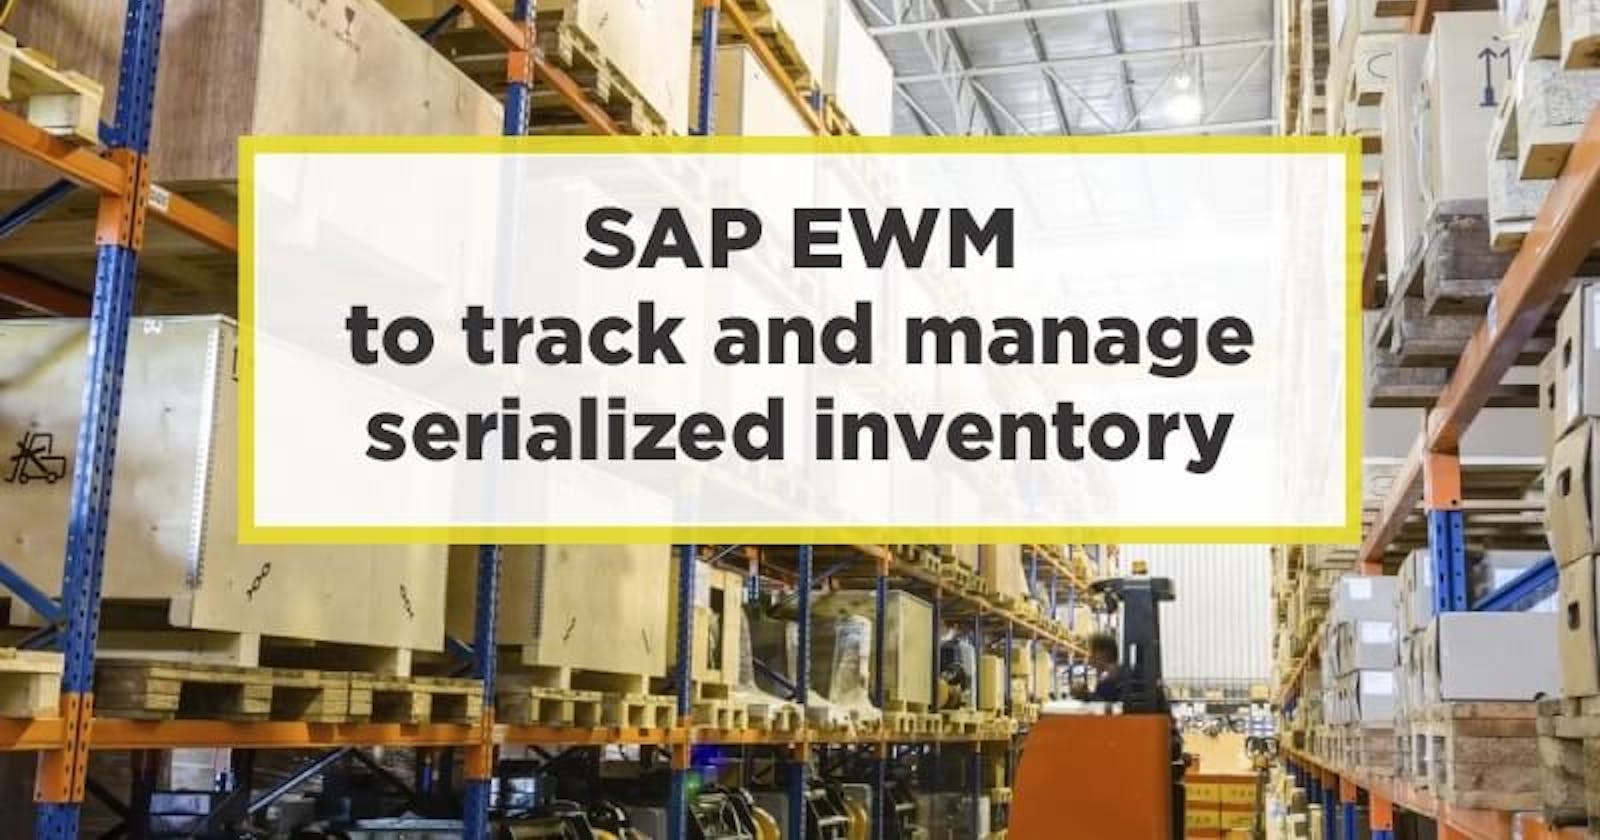 How to use SAP EWM to track and manage serialized inventory?